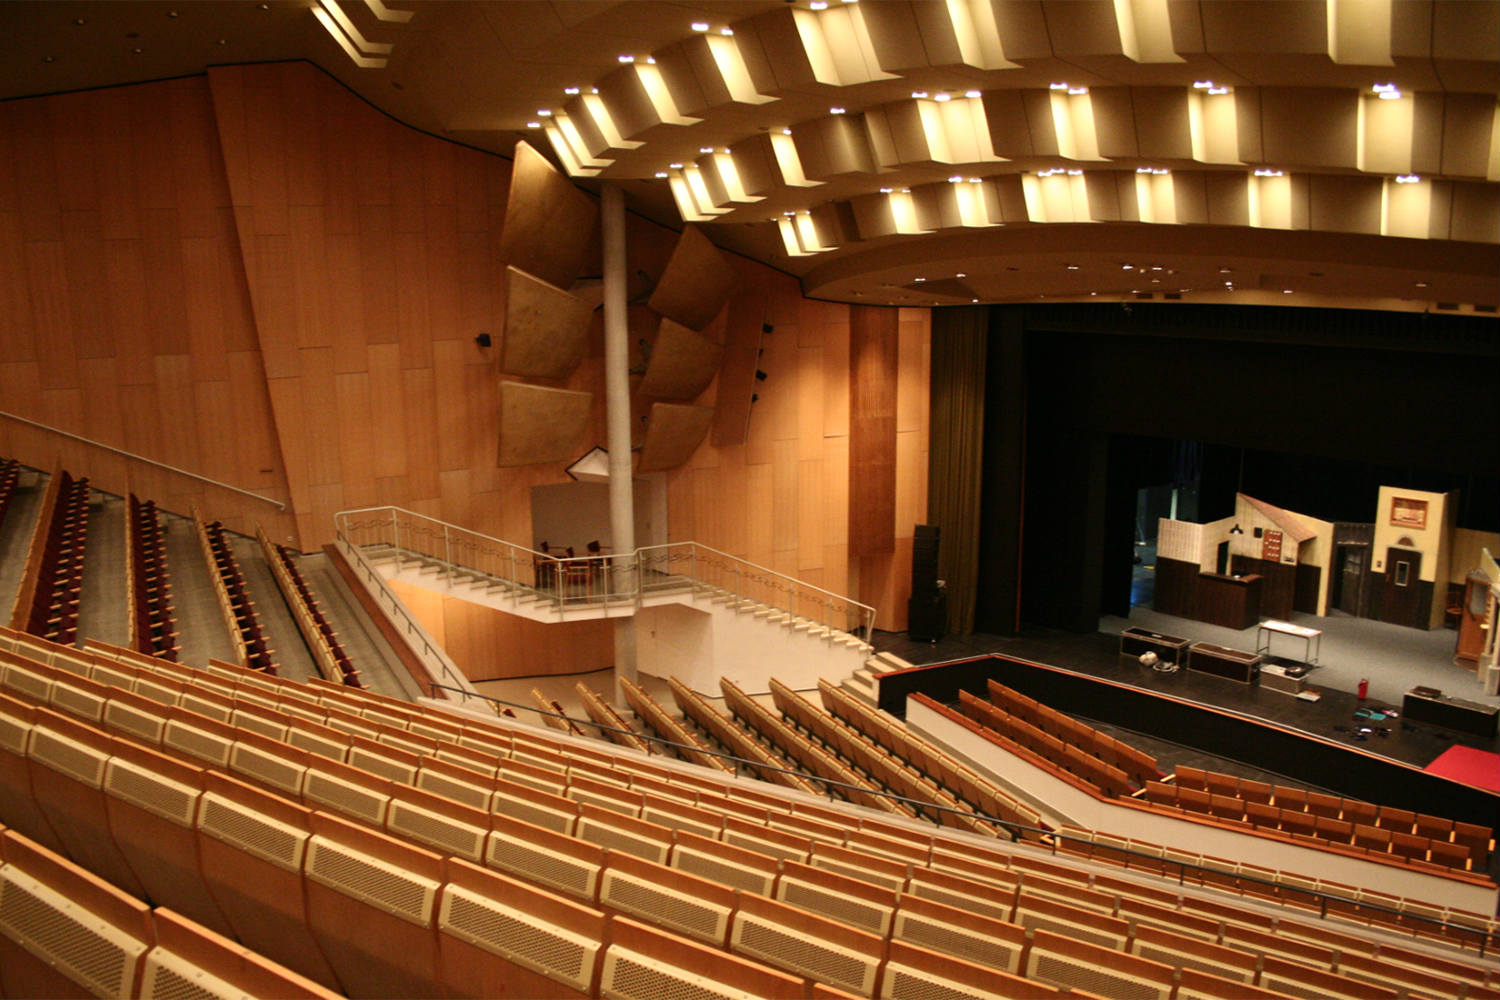 Scharoun-Theater in Wolfsburg, Germany. Electro-acoustics systems and media systems engineering provided by ADA-AMC, a WSDG Company. Theater main photo